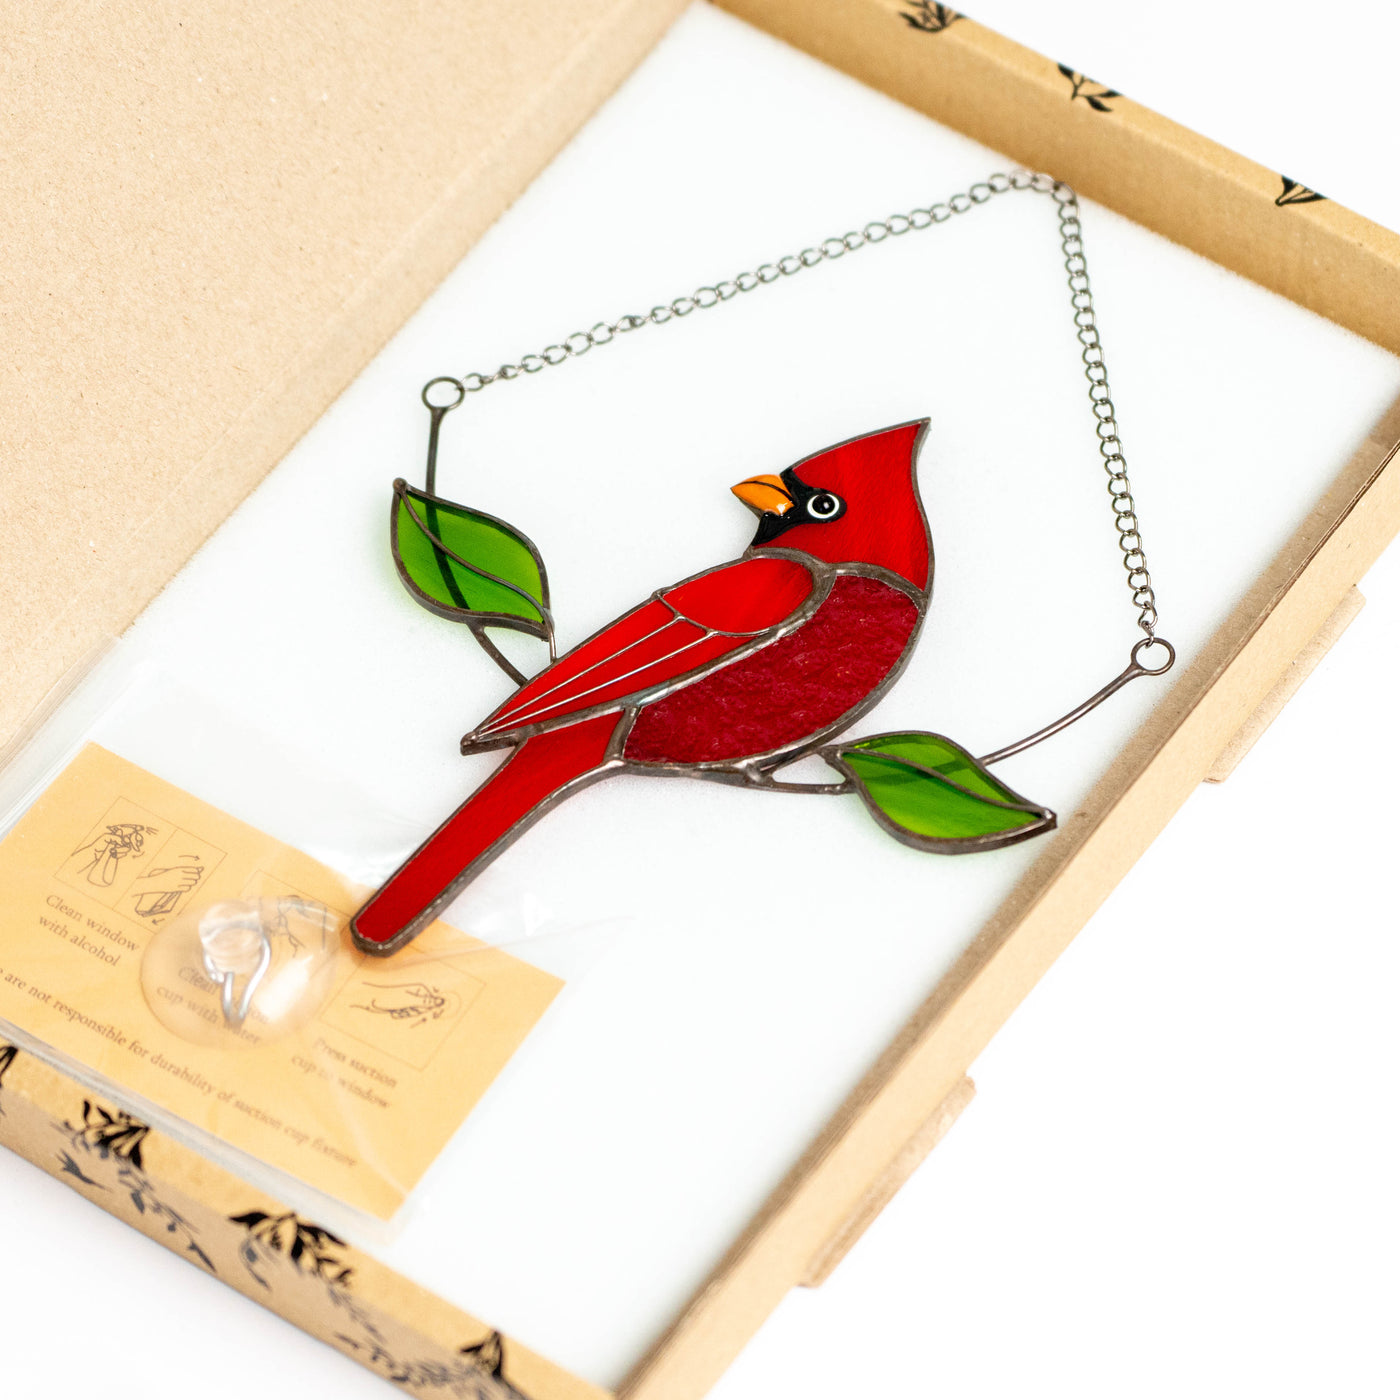 Stained glass red bird suncatcher in a brand box